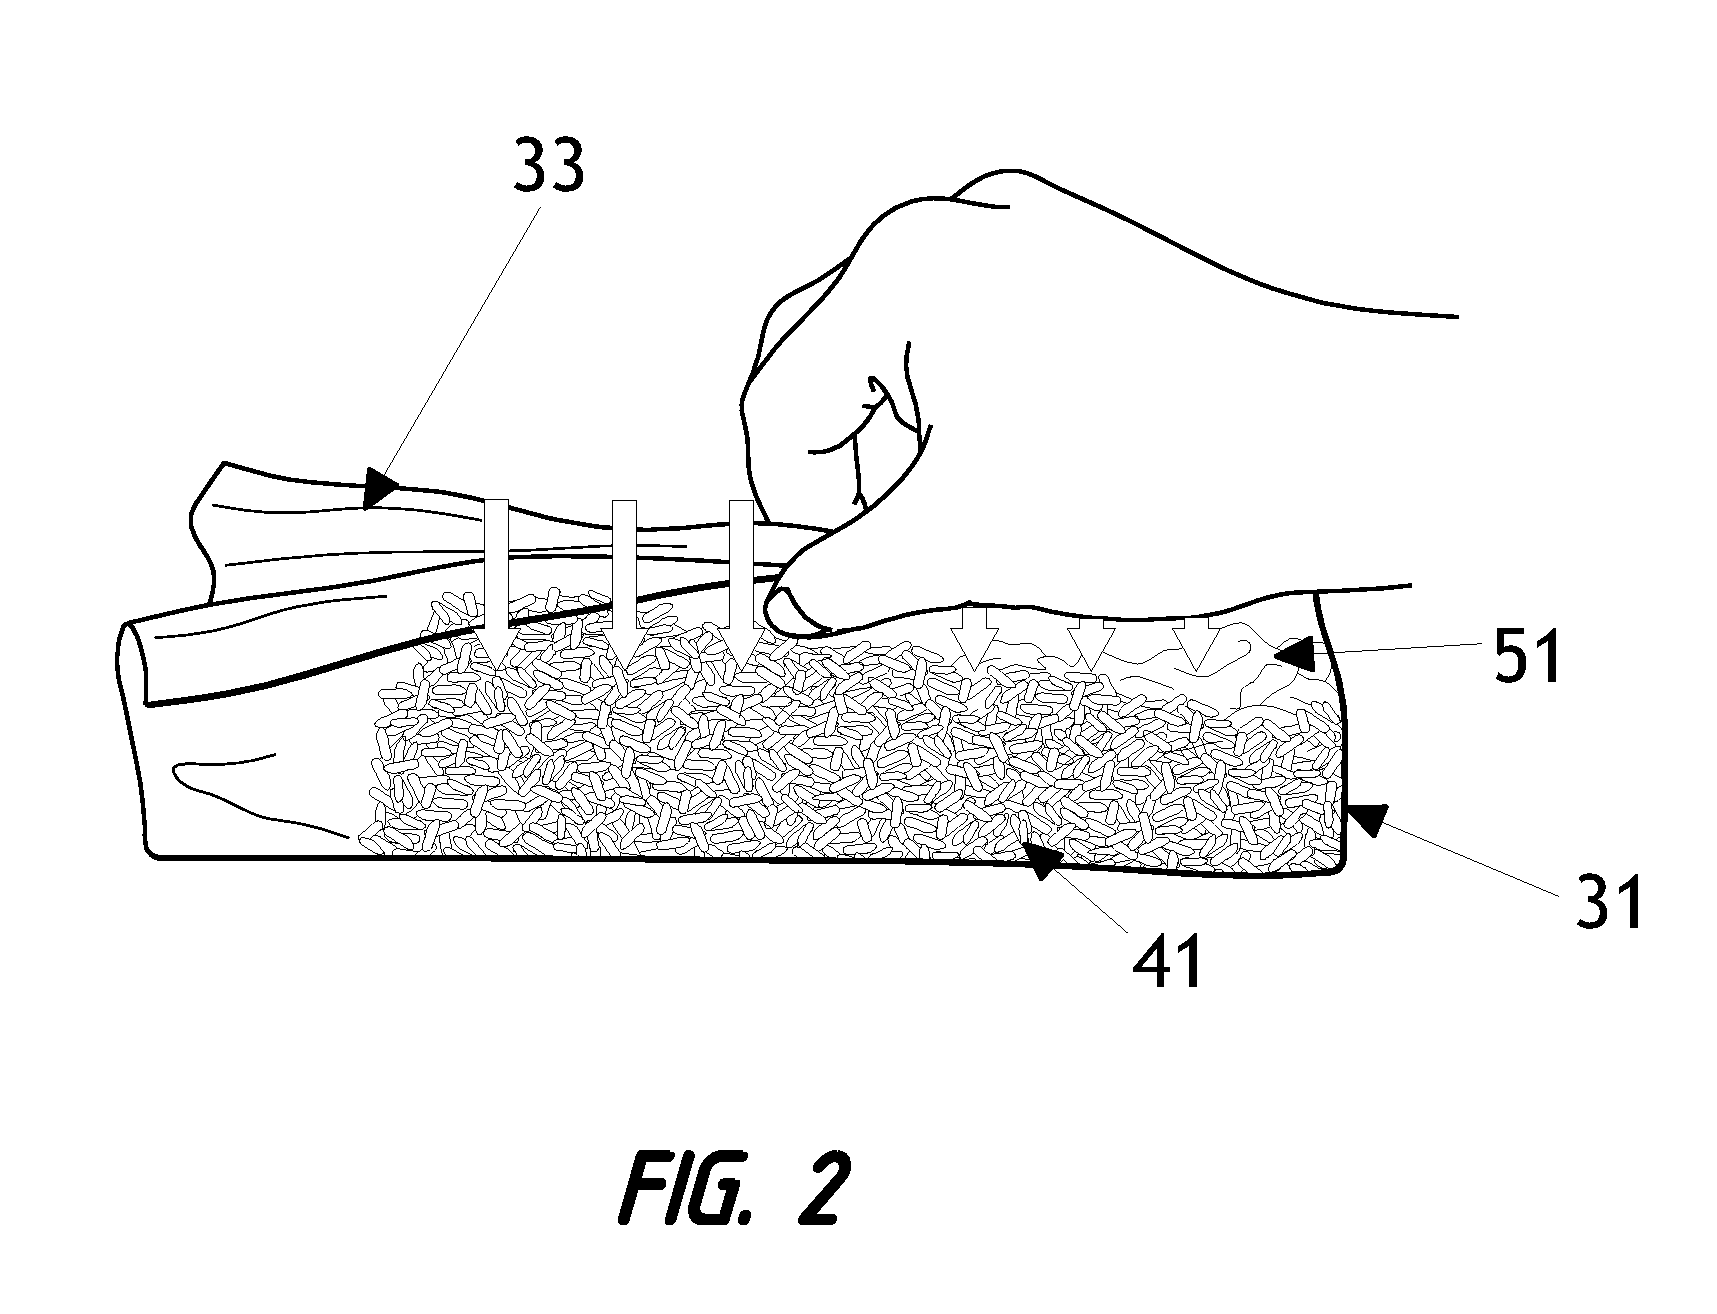 Packaged food product and method of making same